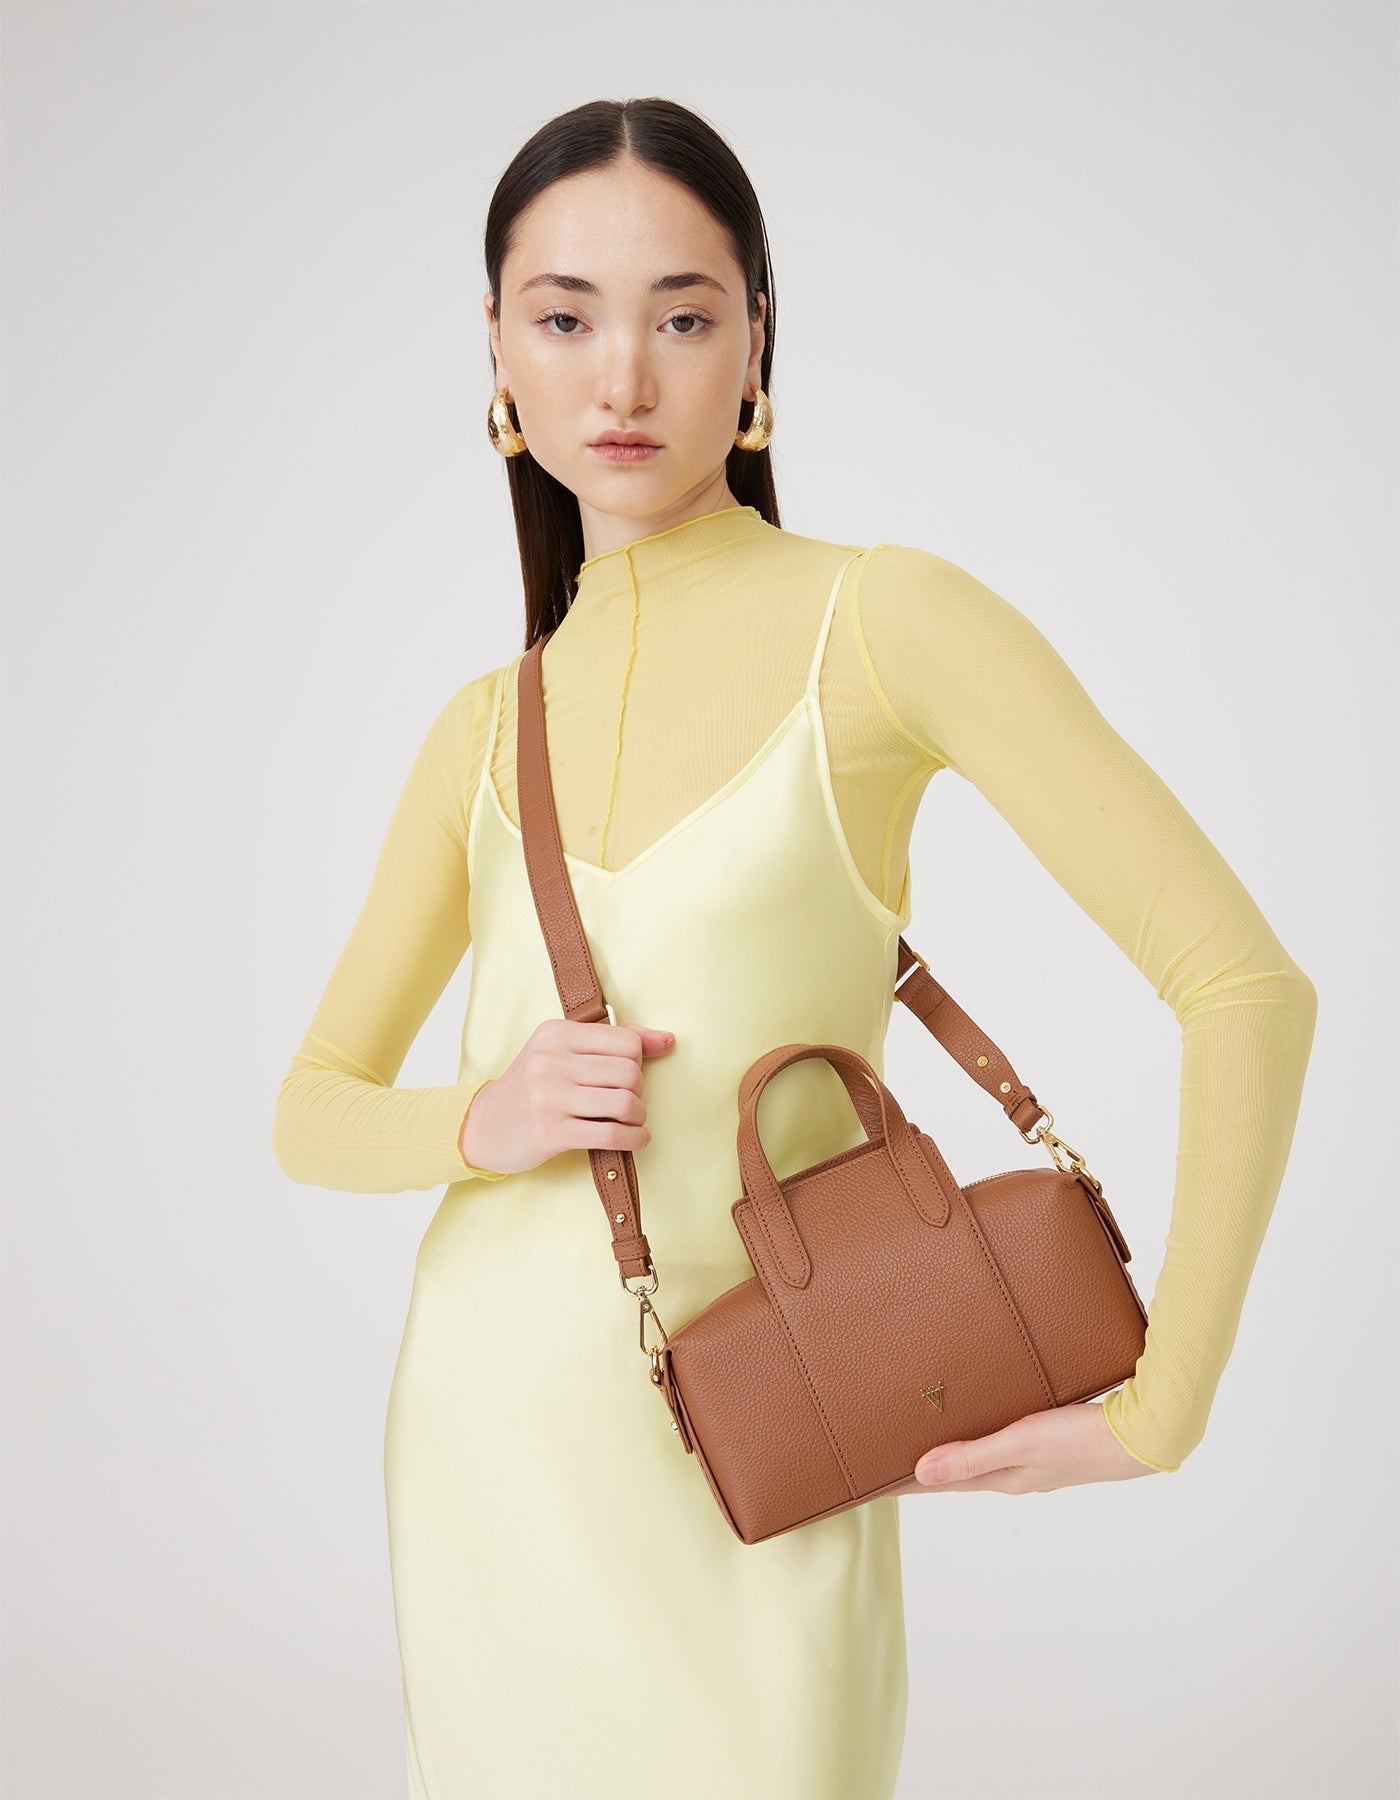 Onsra Cylinder Shoulder Bag - Finest Quality HiVa Atelier GmbH Leather Accessories